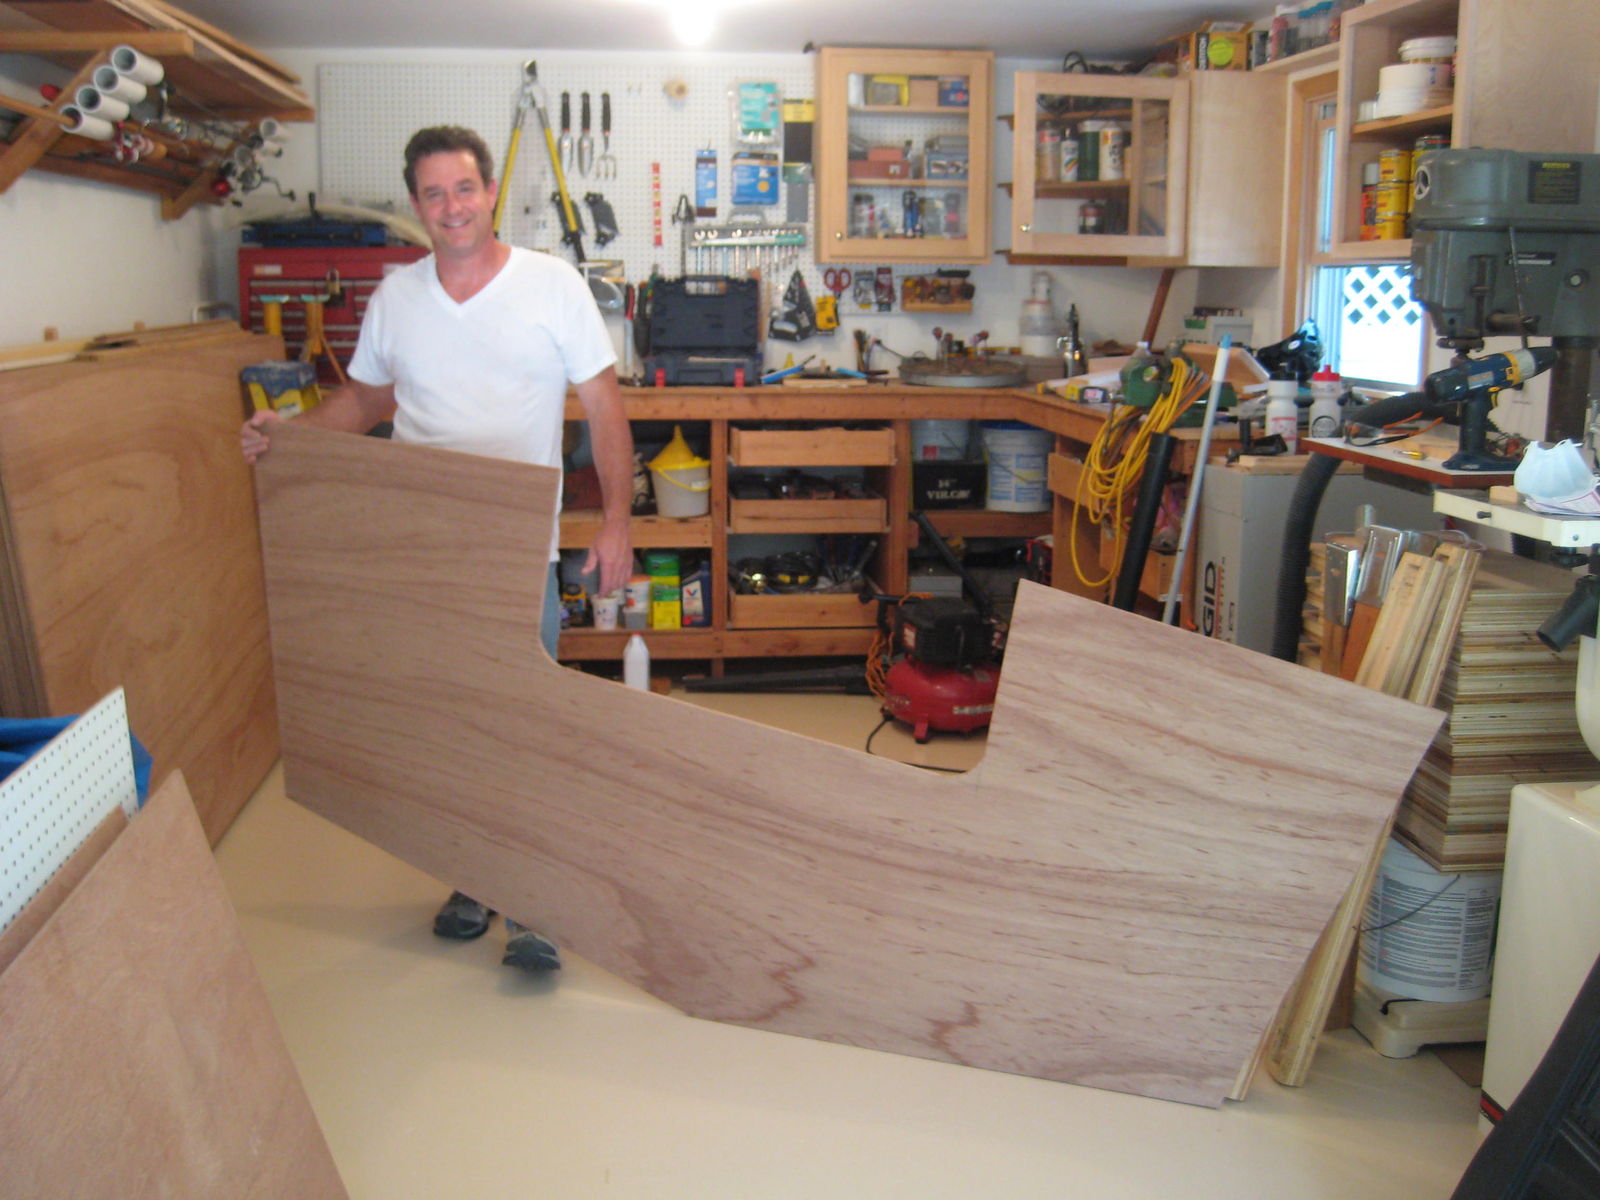 P 21 Transom
Me in newly finished shop with pilot transom
